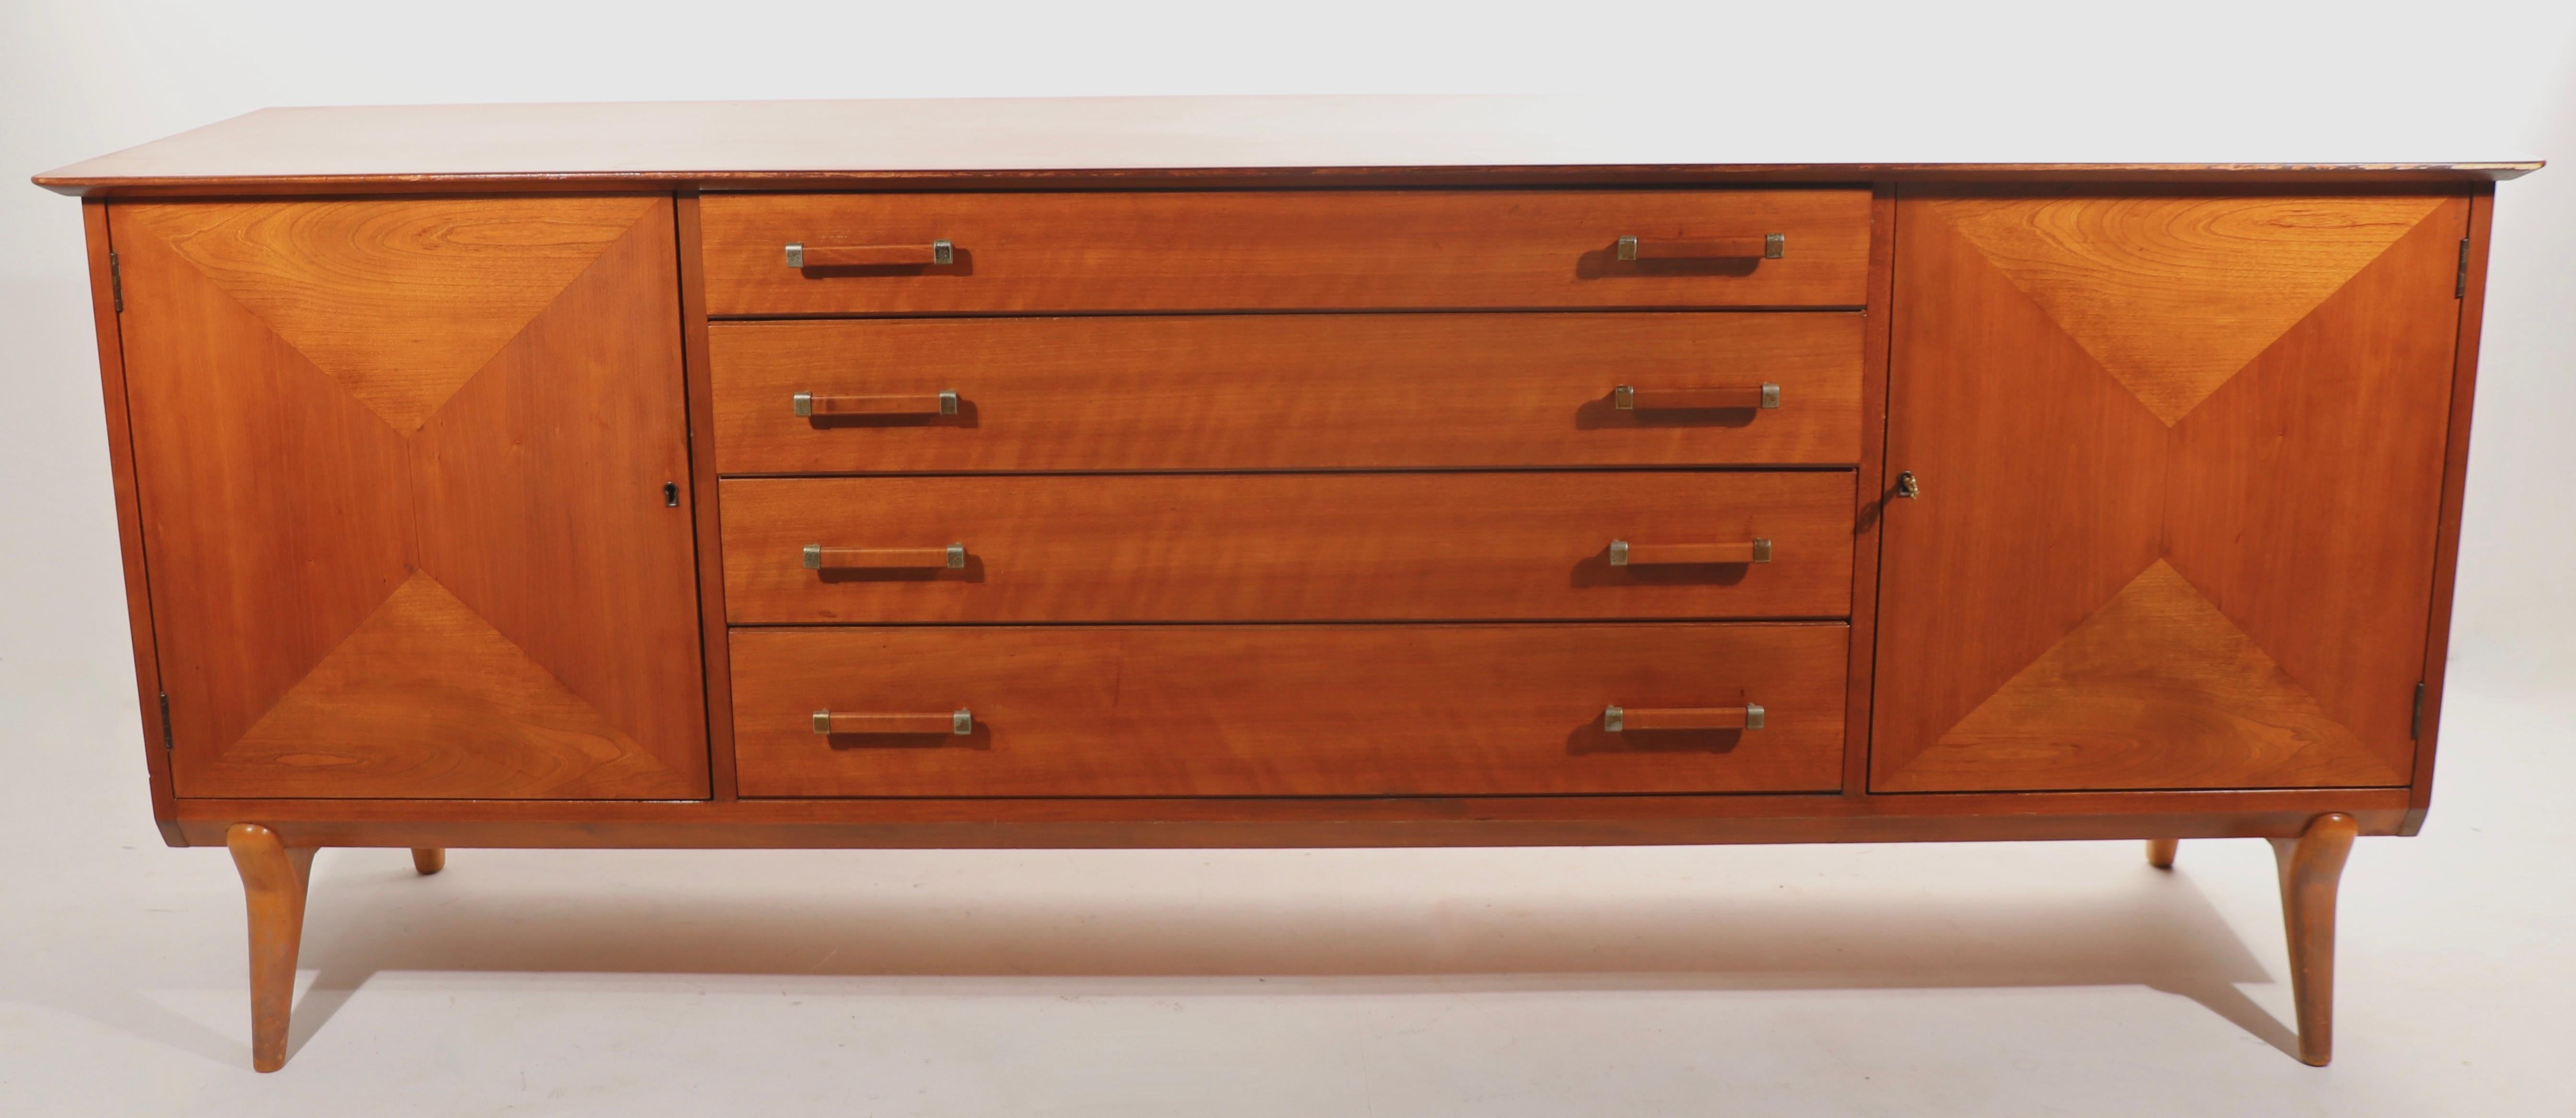 Mid-Century Modern Mid Century Credenza Sideboard Dresser by Renzo Rutily for Johnson Furniture Co.